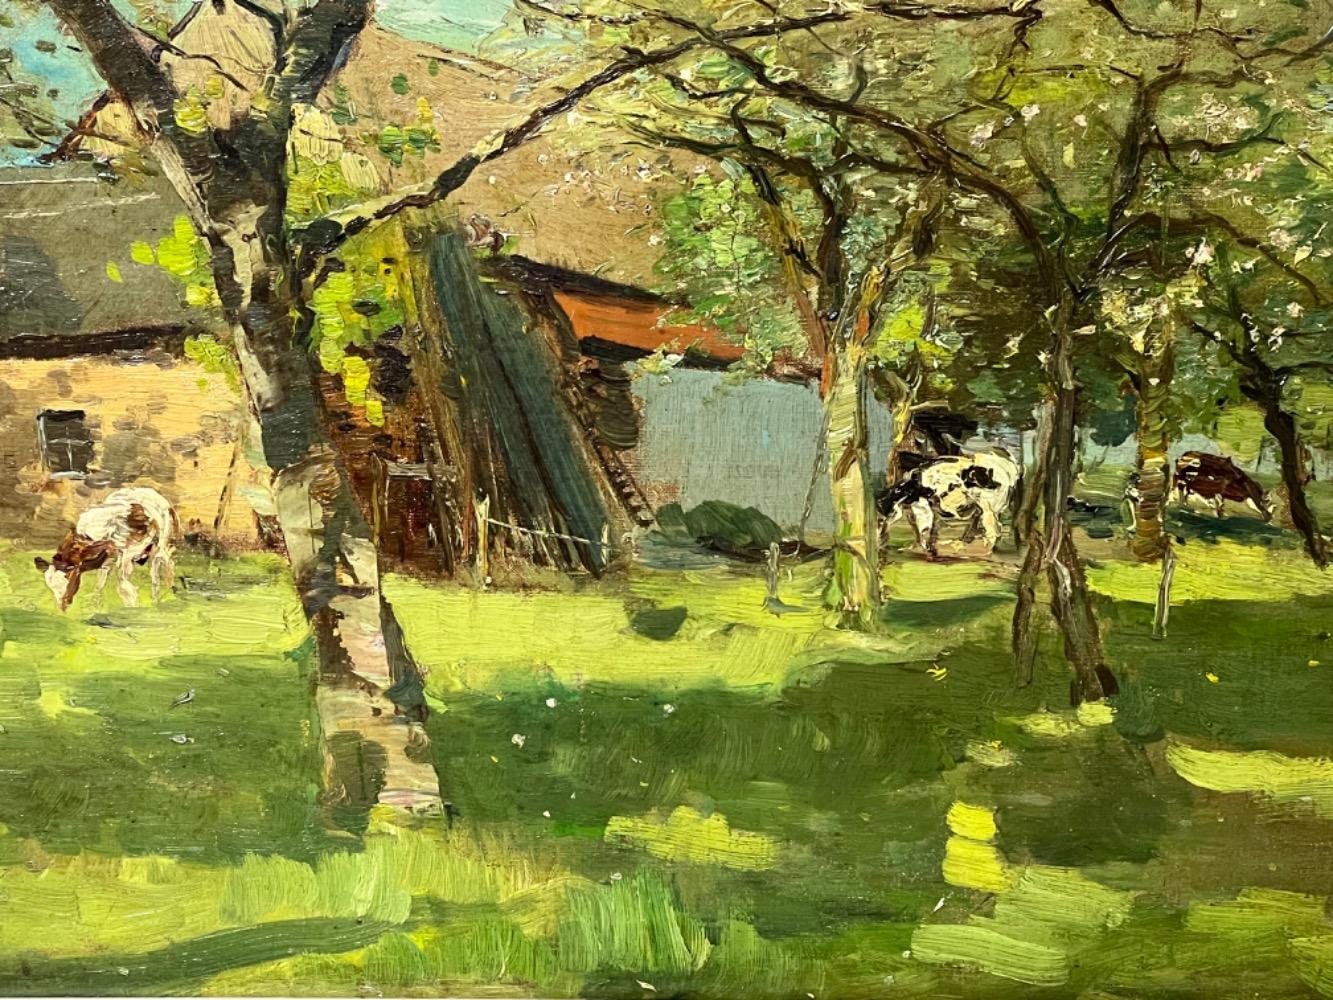 Cows in the orchard ( oil on canvas )